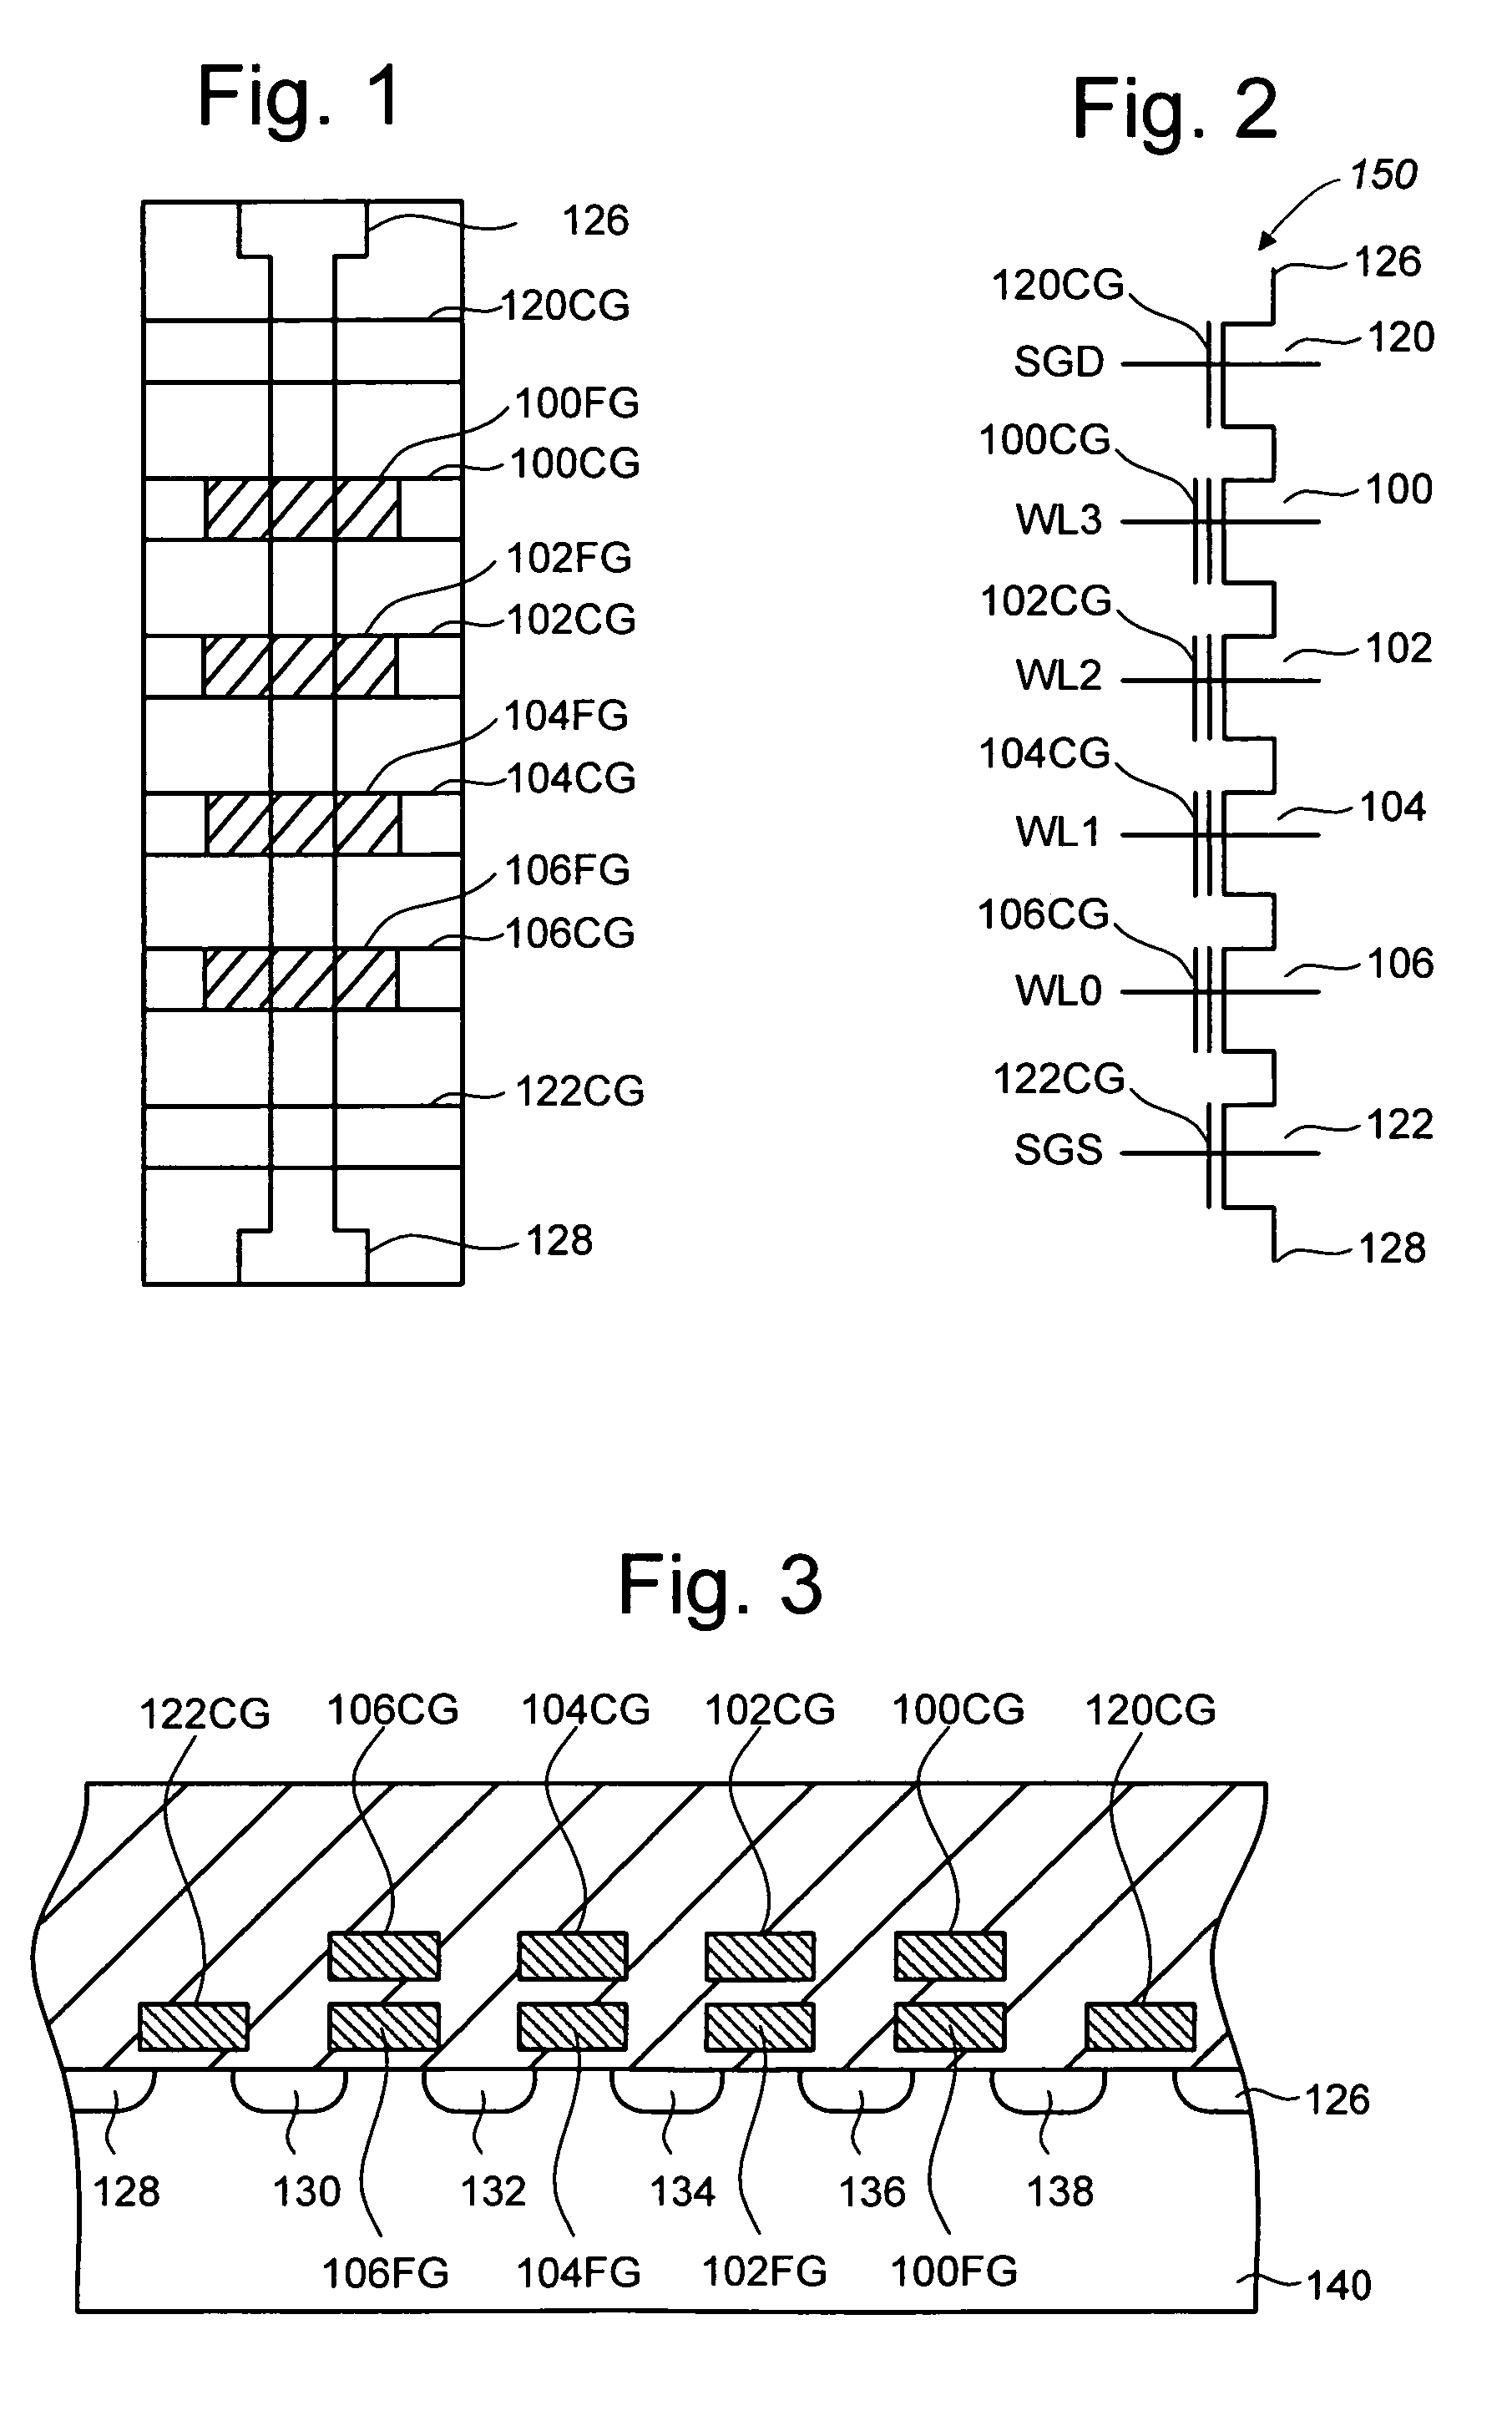 Read operation for non-volatile storage that includes compensation for coupling